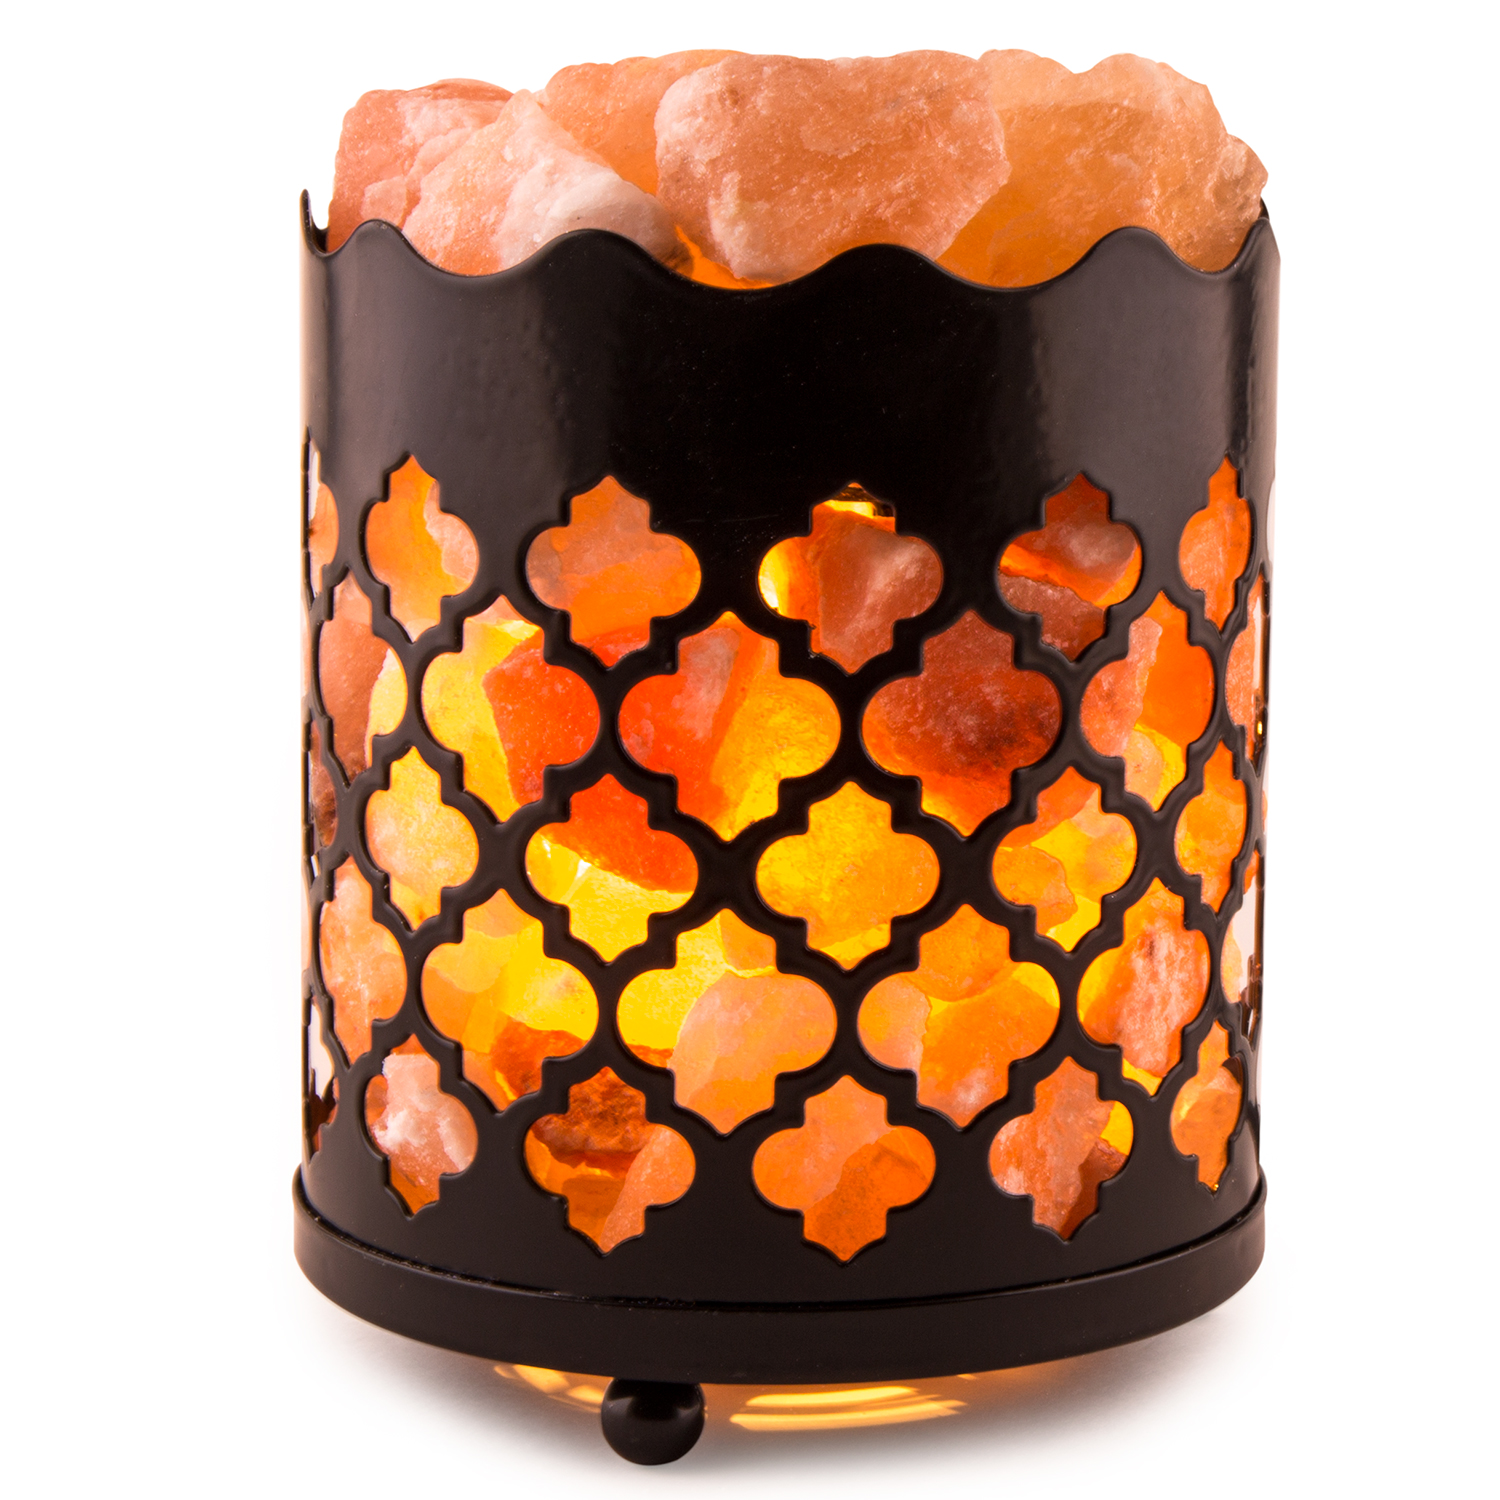 CRYSTAL DECOR Natural Himalayan Salt Lamp with Salt Chunks in Cylinder Design Metal Basket with Dimmable Cord - image 1 of 2